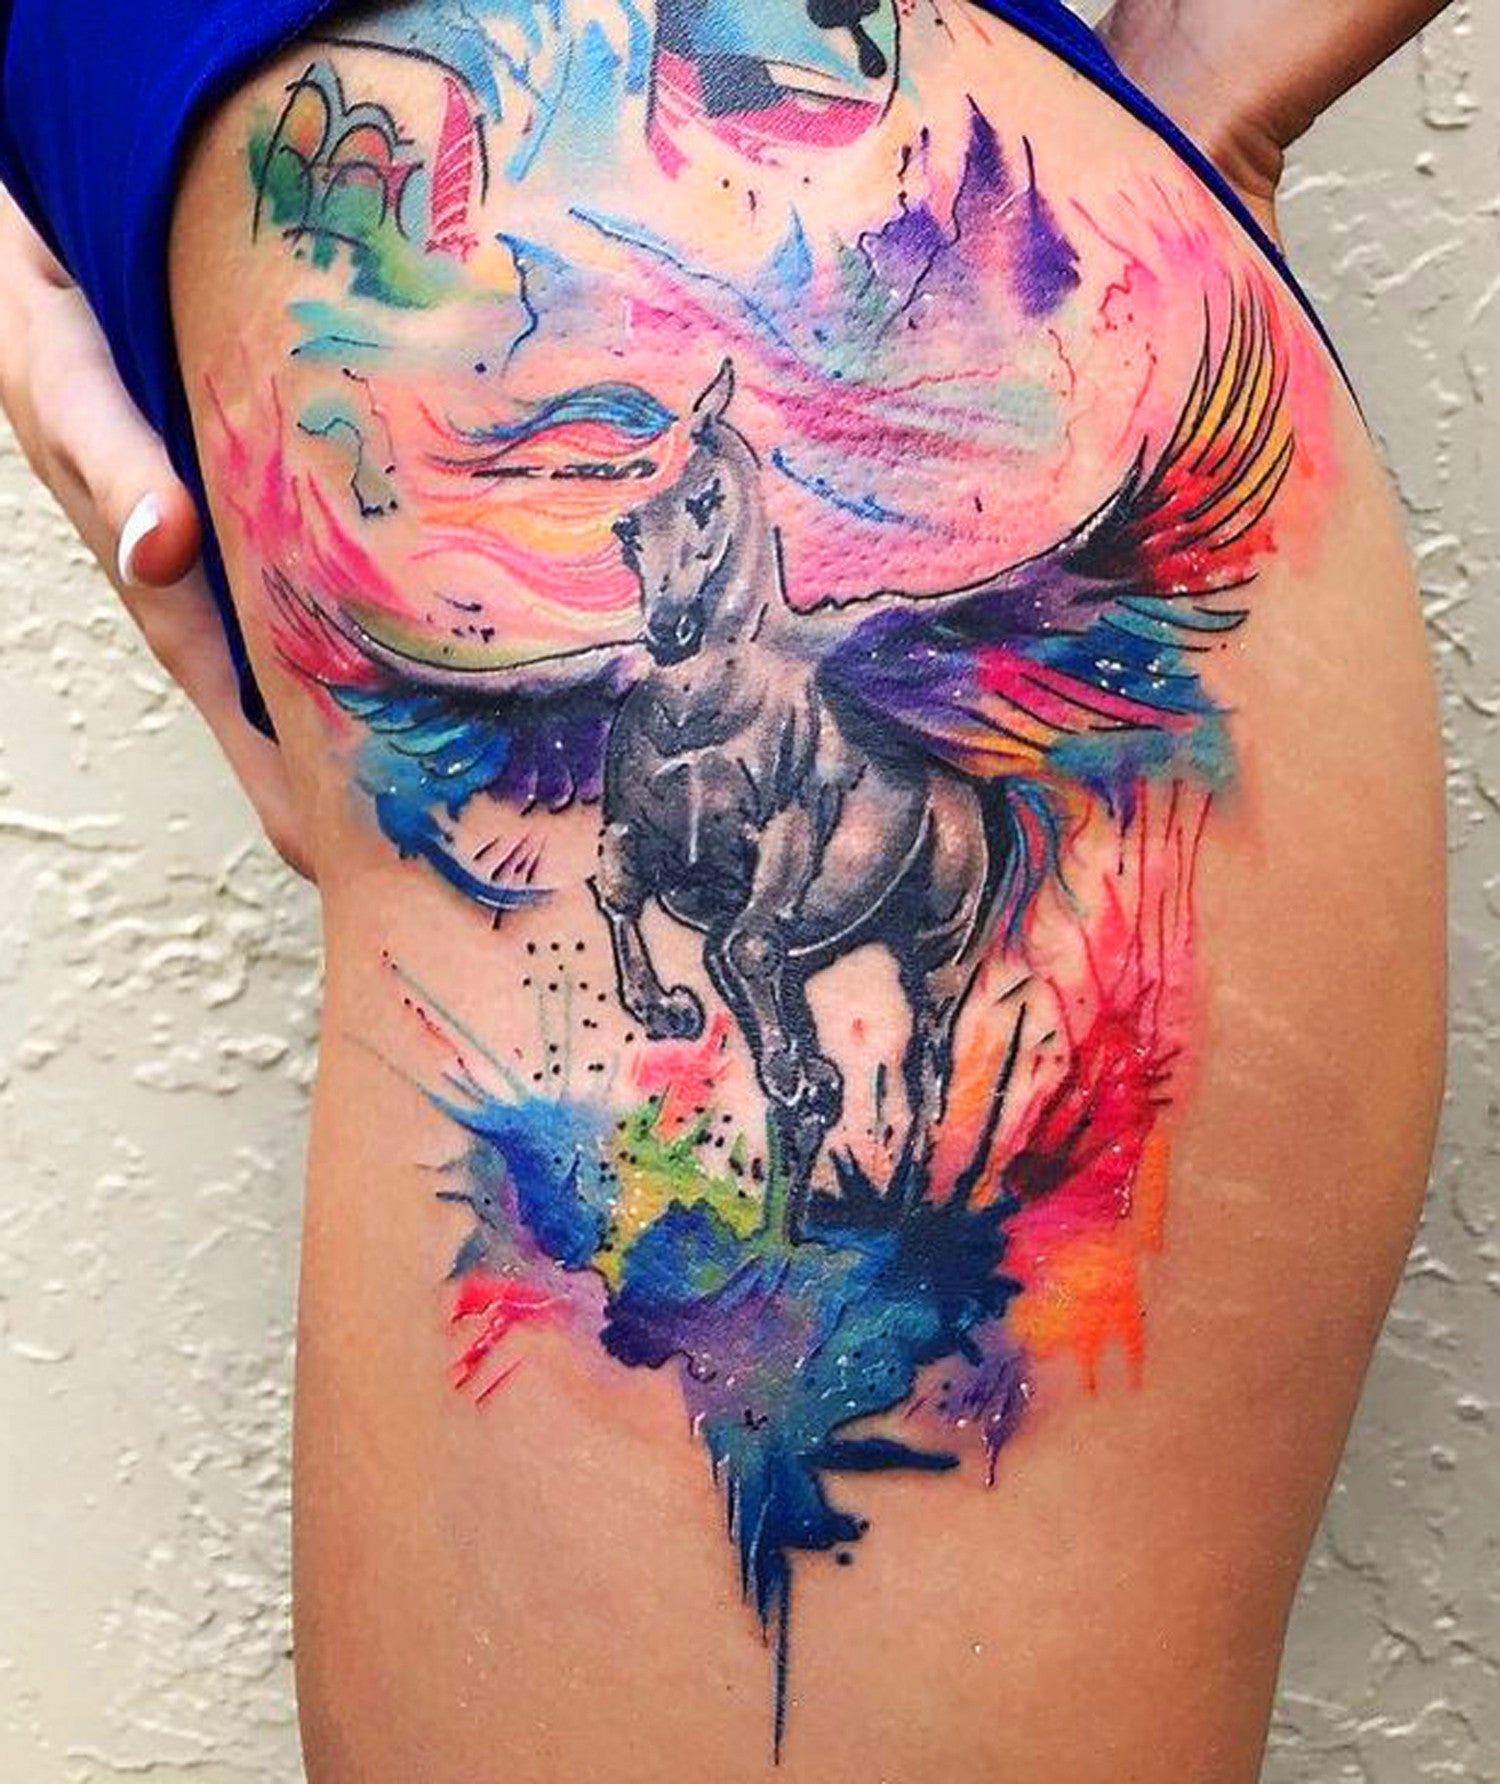 38 Beautiful Nurse Tattoos with Meaning - Our Mindful Life